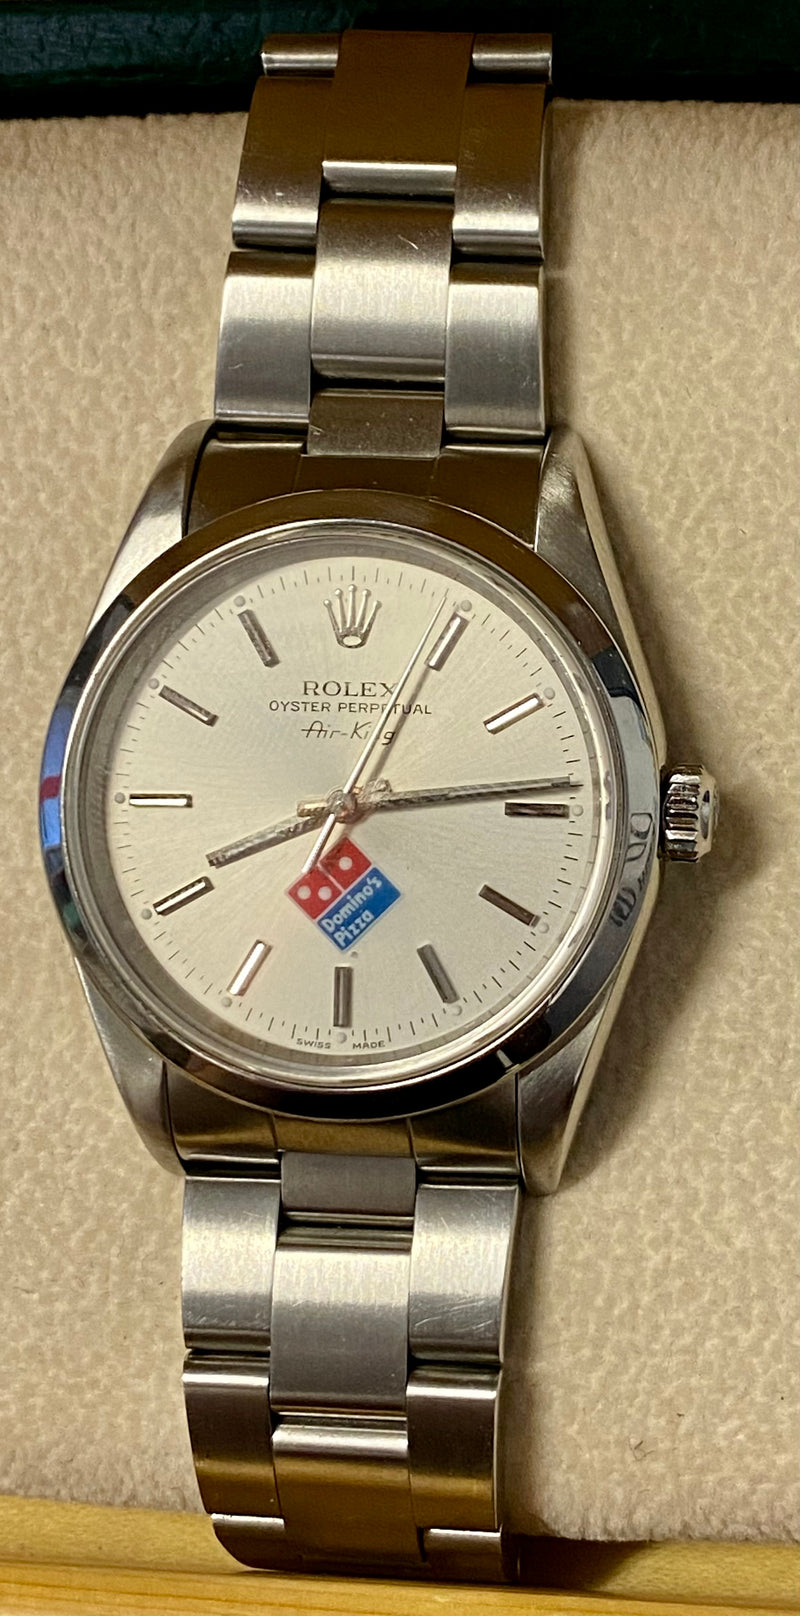 ROLEX Air King Domino's Pizza Dial Automatic Stainless Steel - $30K APR w/ COA!! APR57